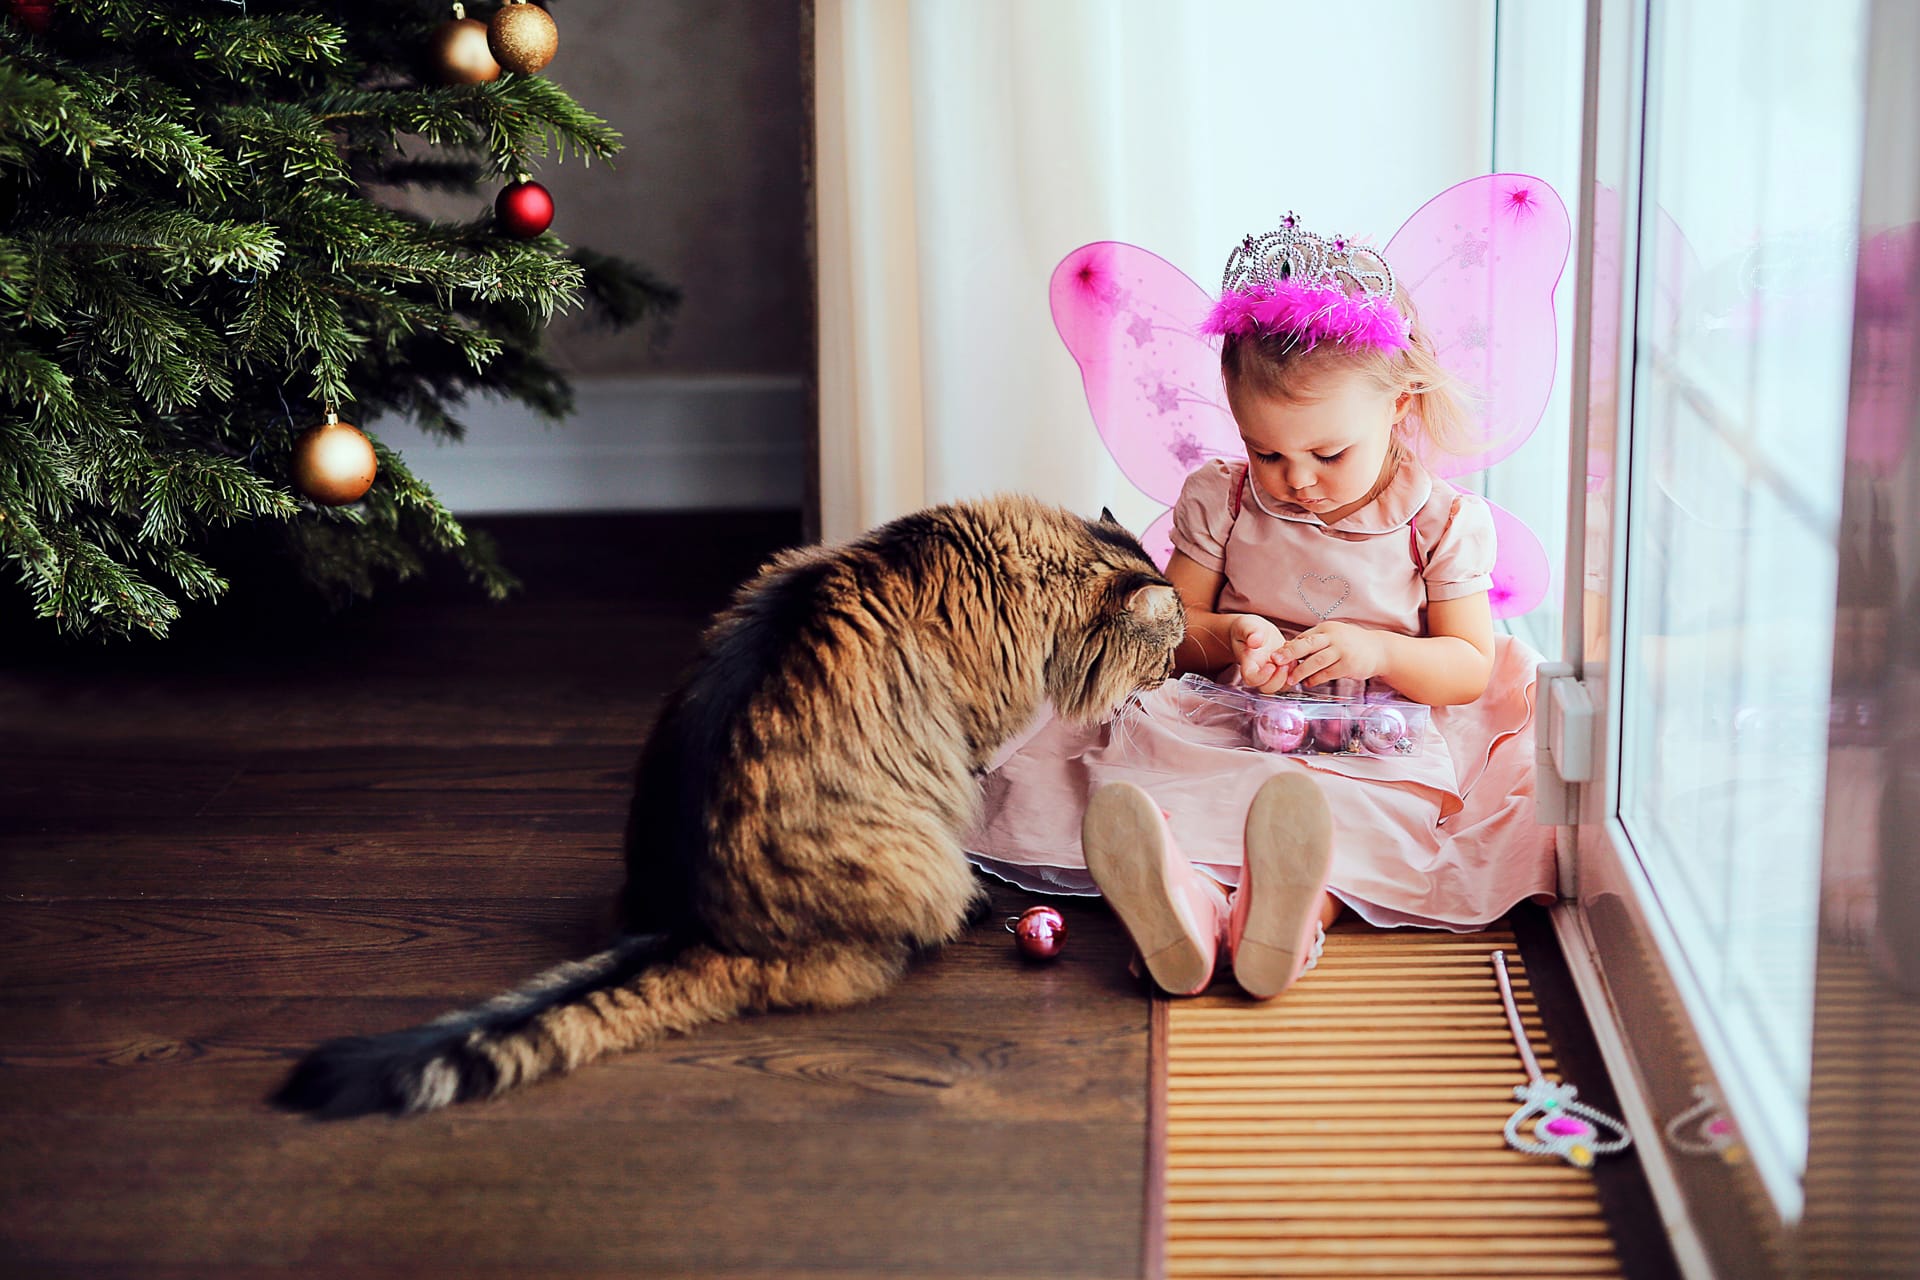 Cute kid fairy costume playing with cat near christmas tree